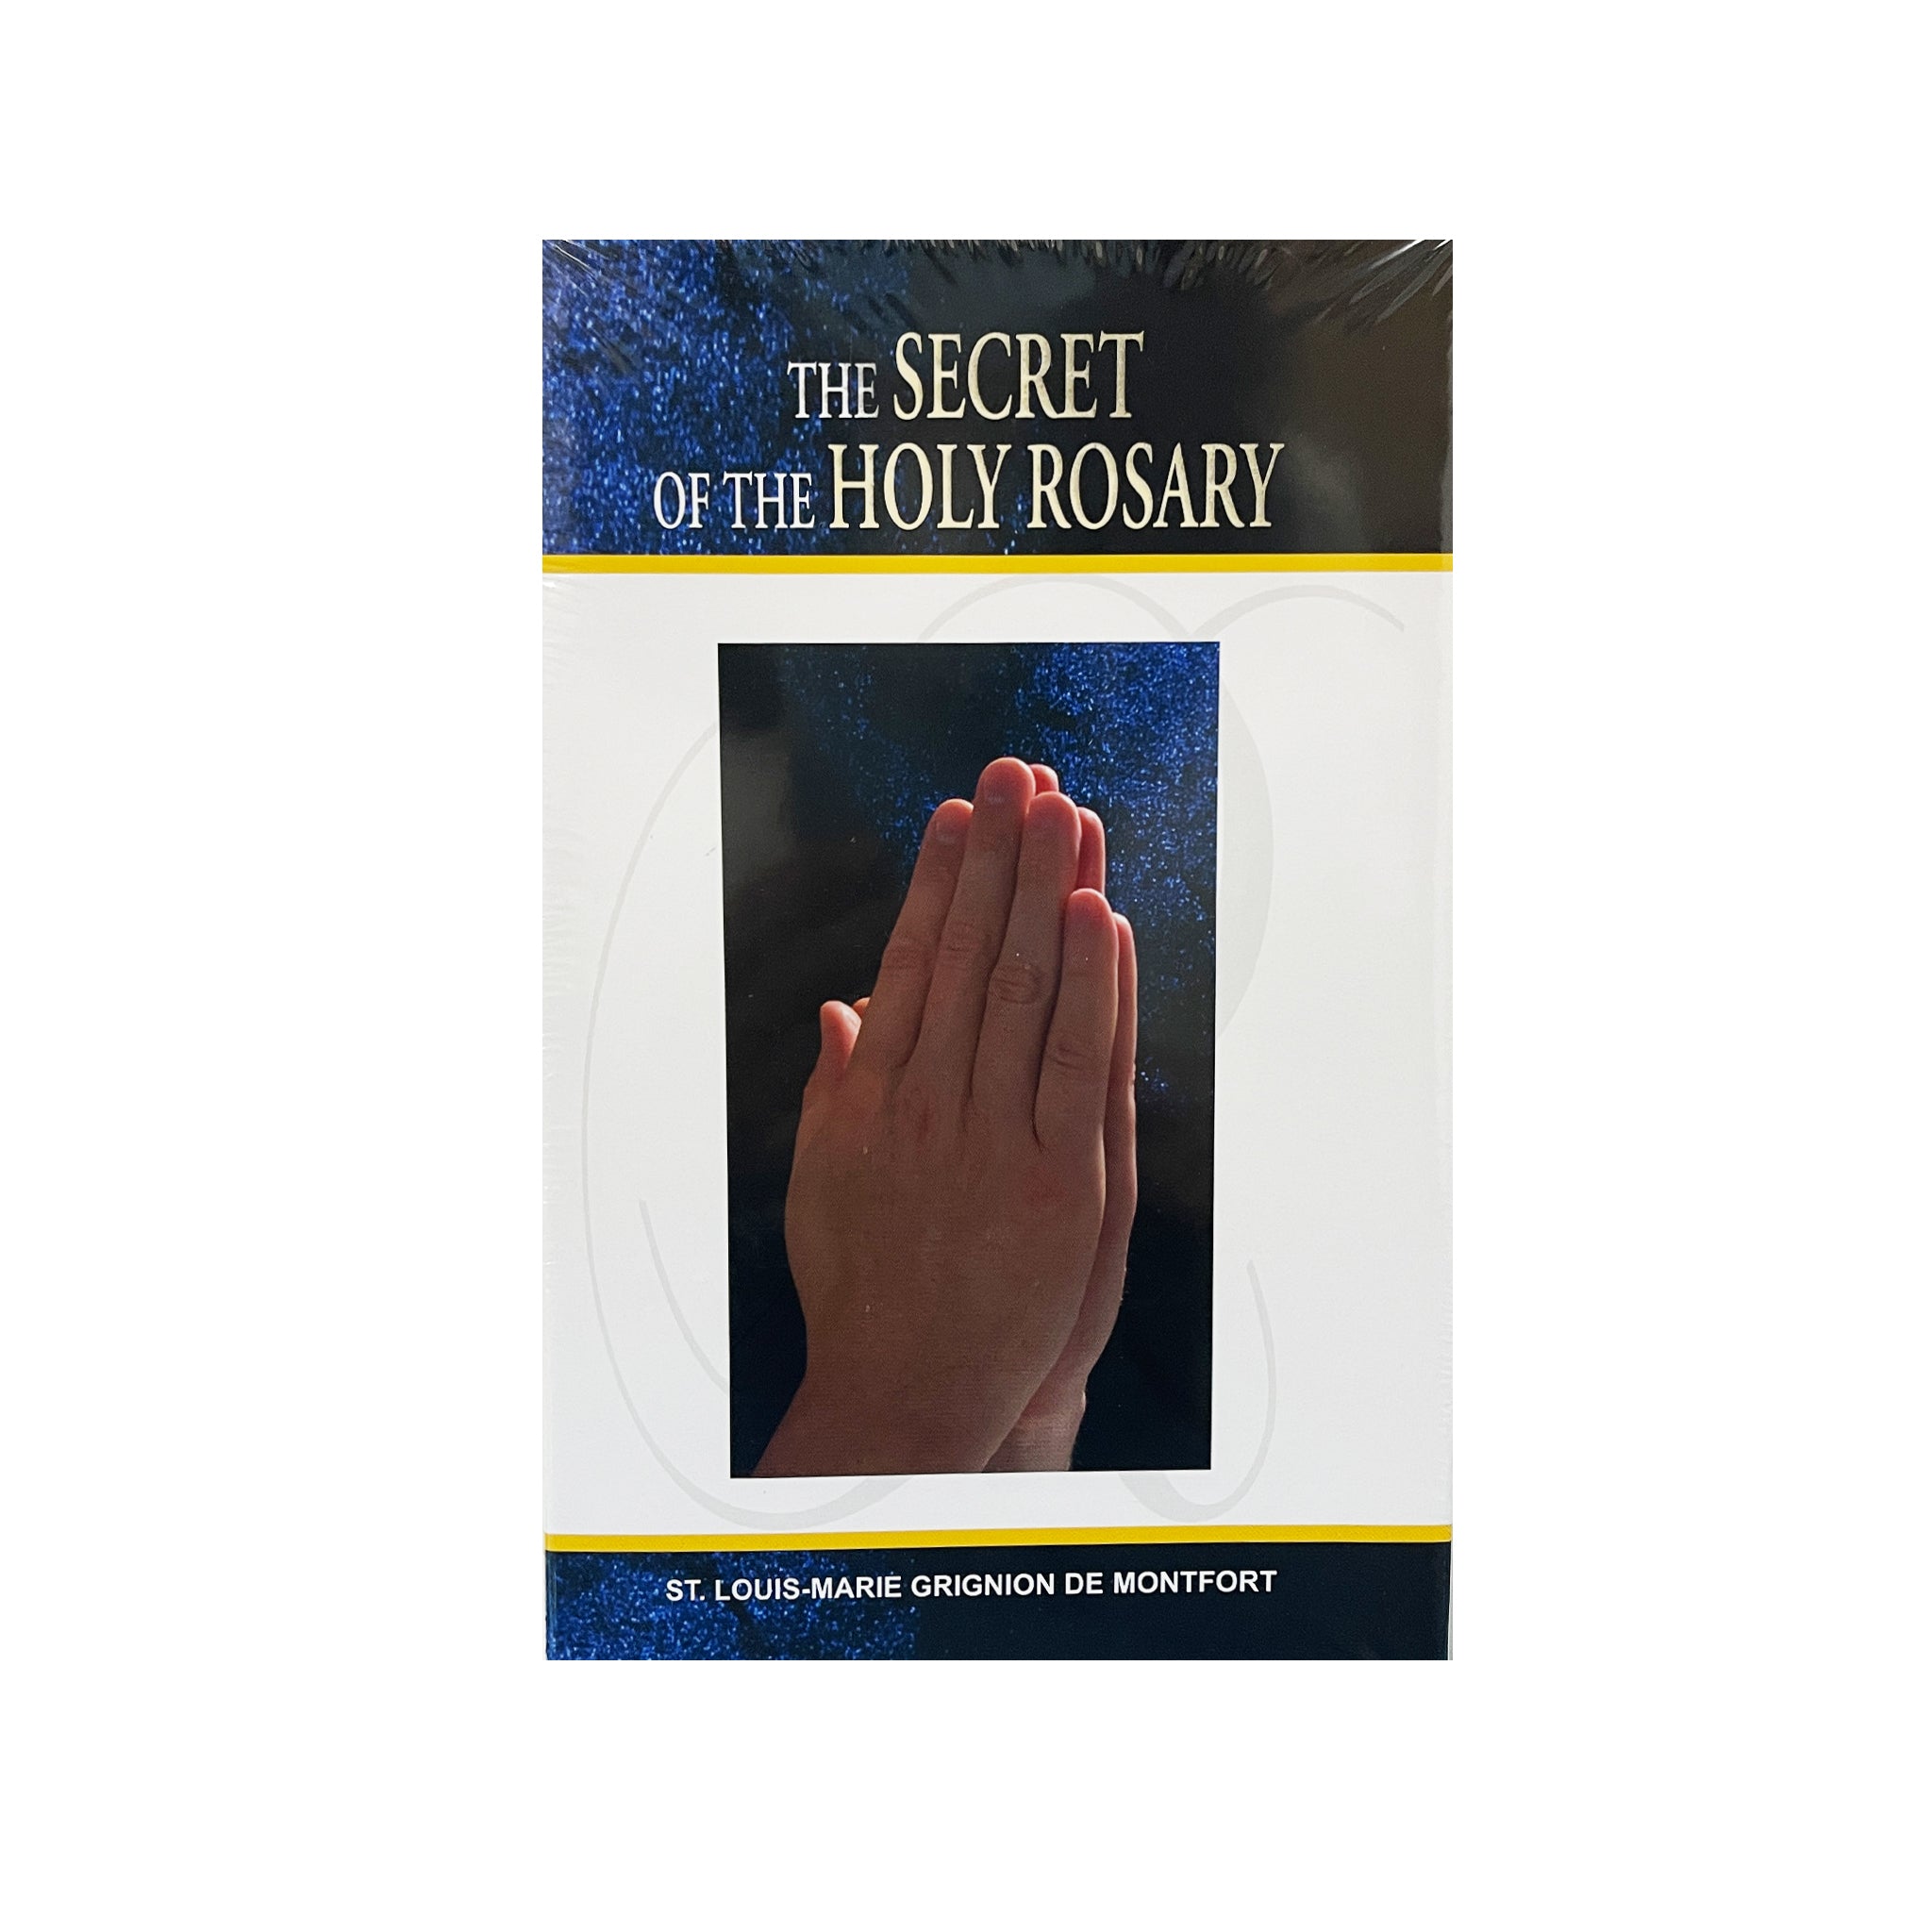 THE SECRET OF THE HOLY ROSARY